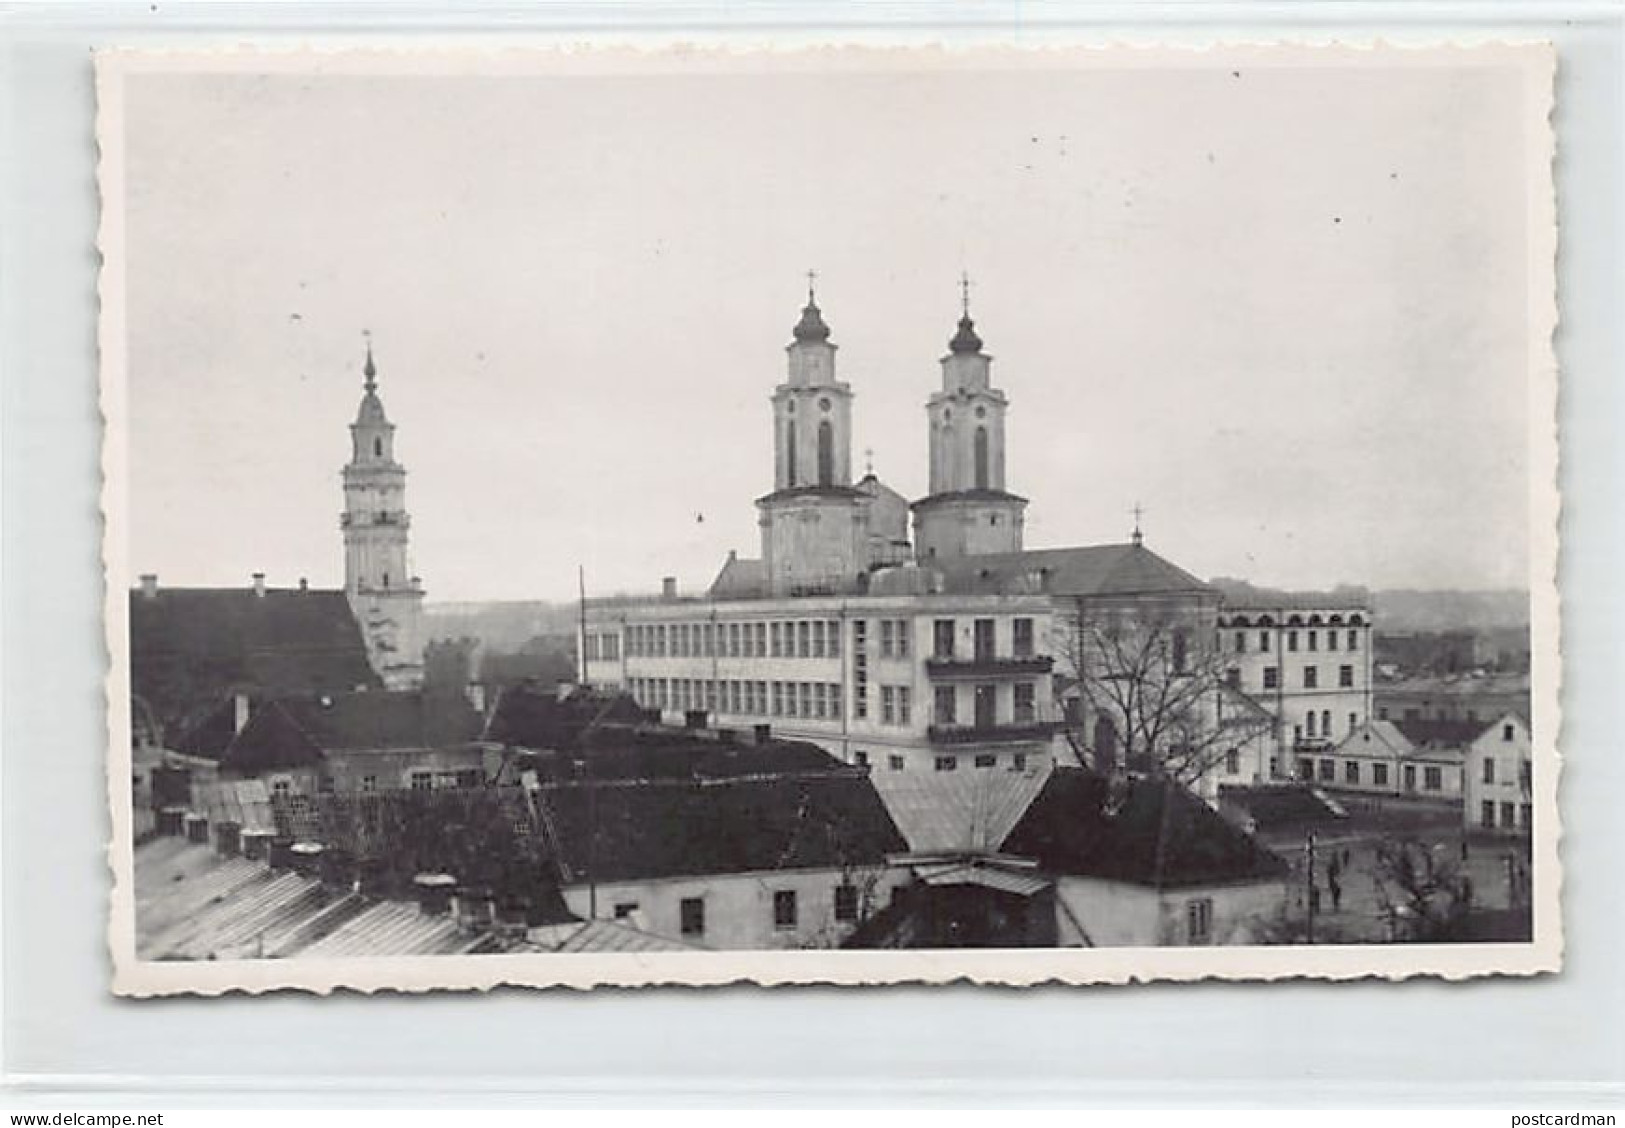 Lithuania - KAUNAS - St. Stanislas Church Of The Jesuits' College - Aerial View - REAL PHOTO  - Litouwen